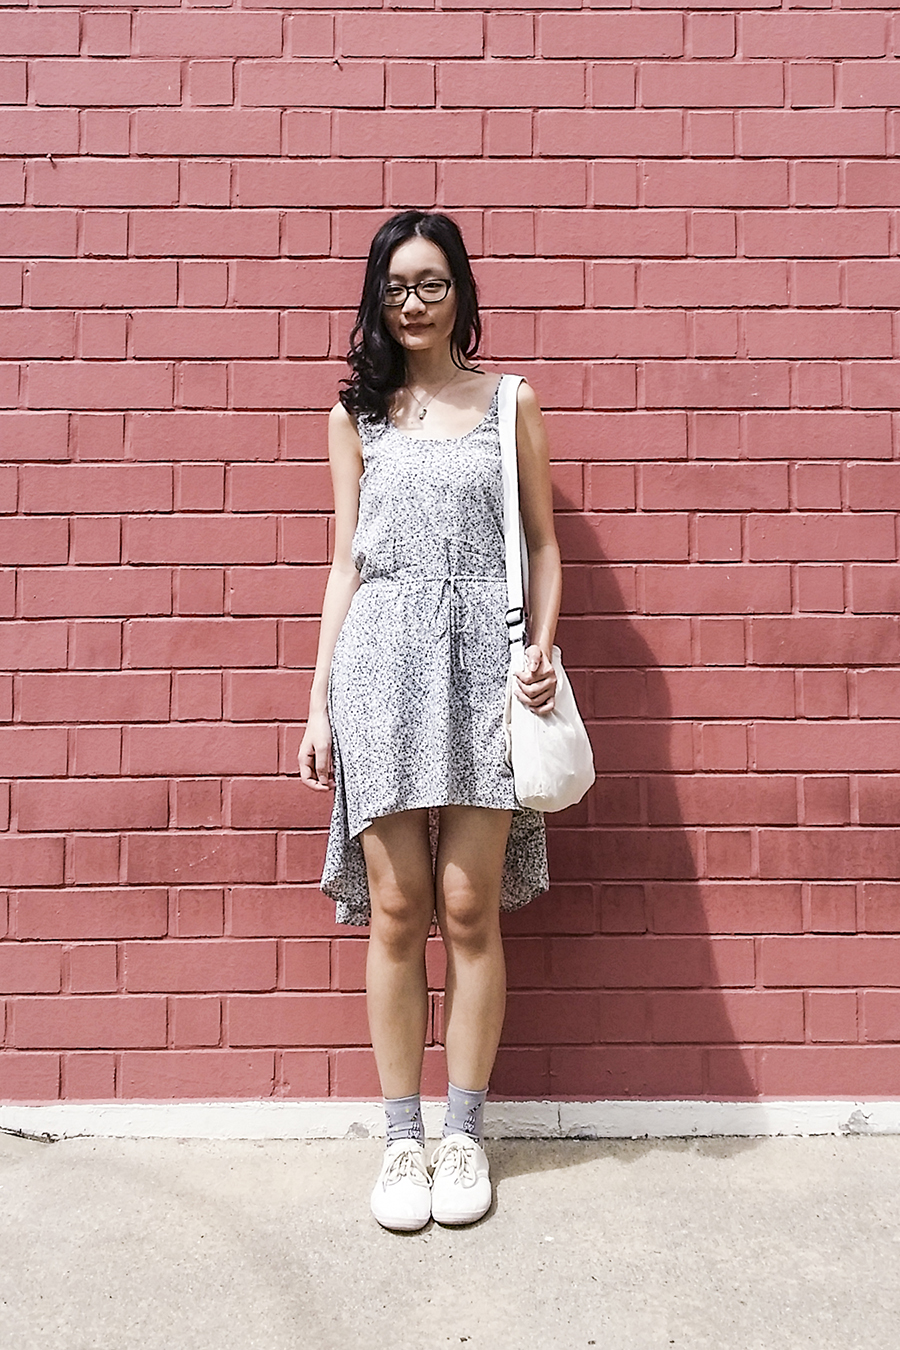 Gap black frame glasses, Modcloth bicycle print high low dress, canvas sling bag, Taobao grey spacemen in space socks, Cotton On tan lace-ups.